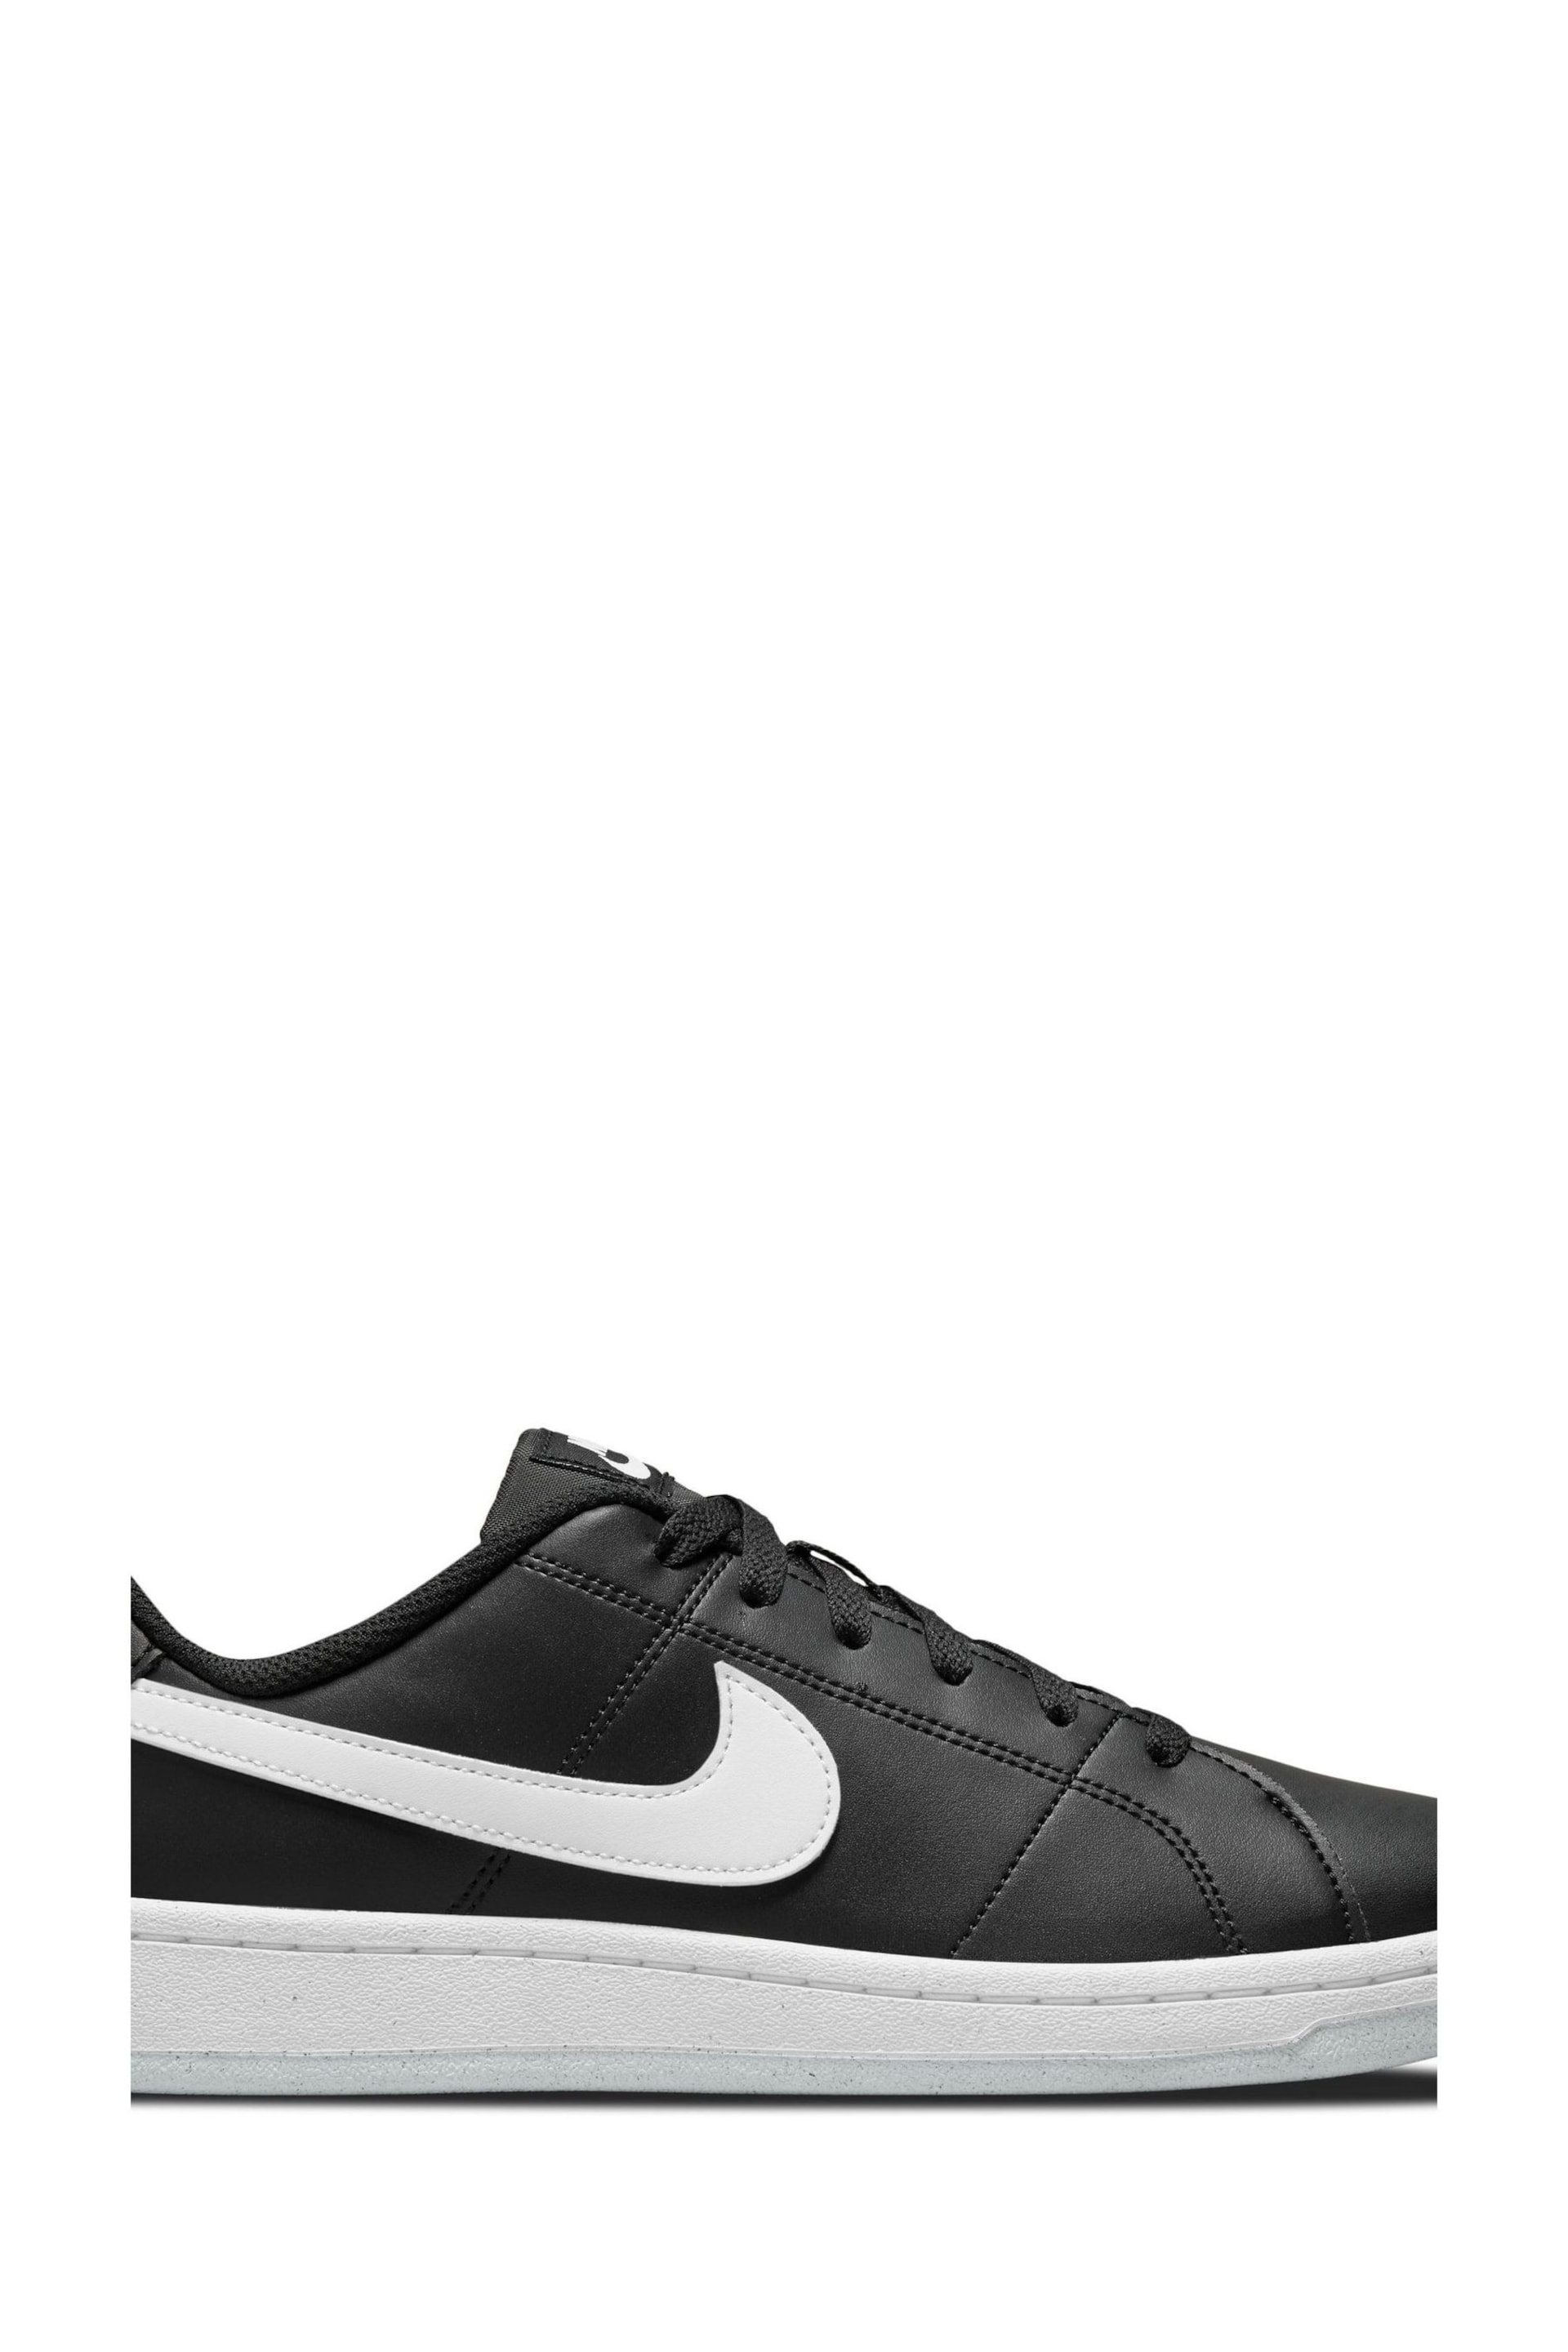 Nike Black Court Royale Trainers - Image 1 of 8